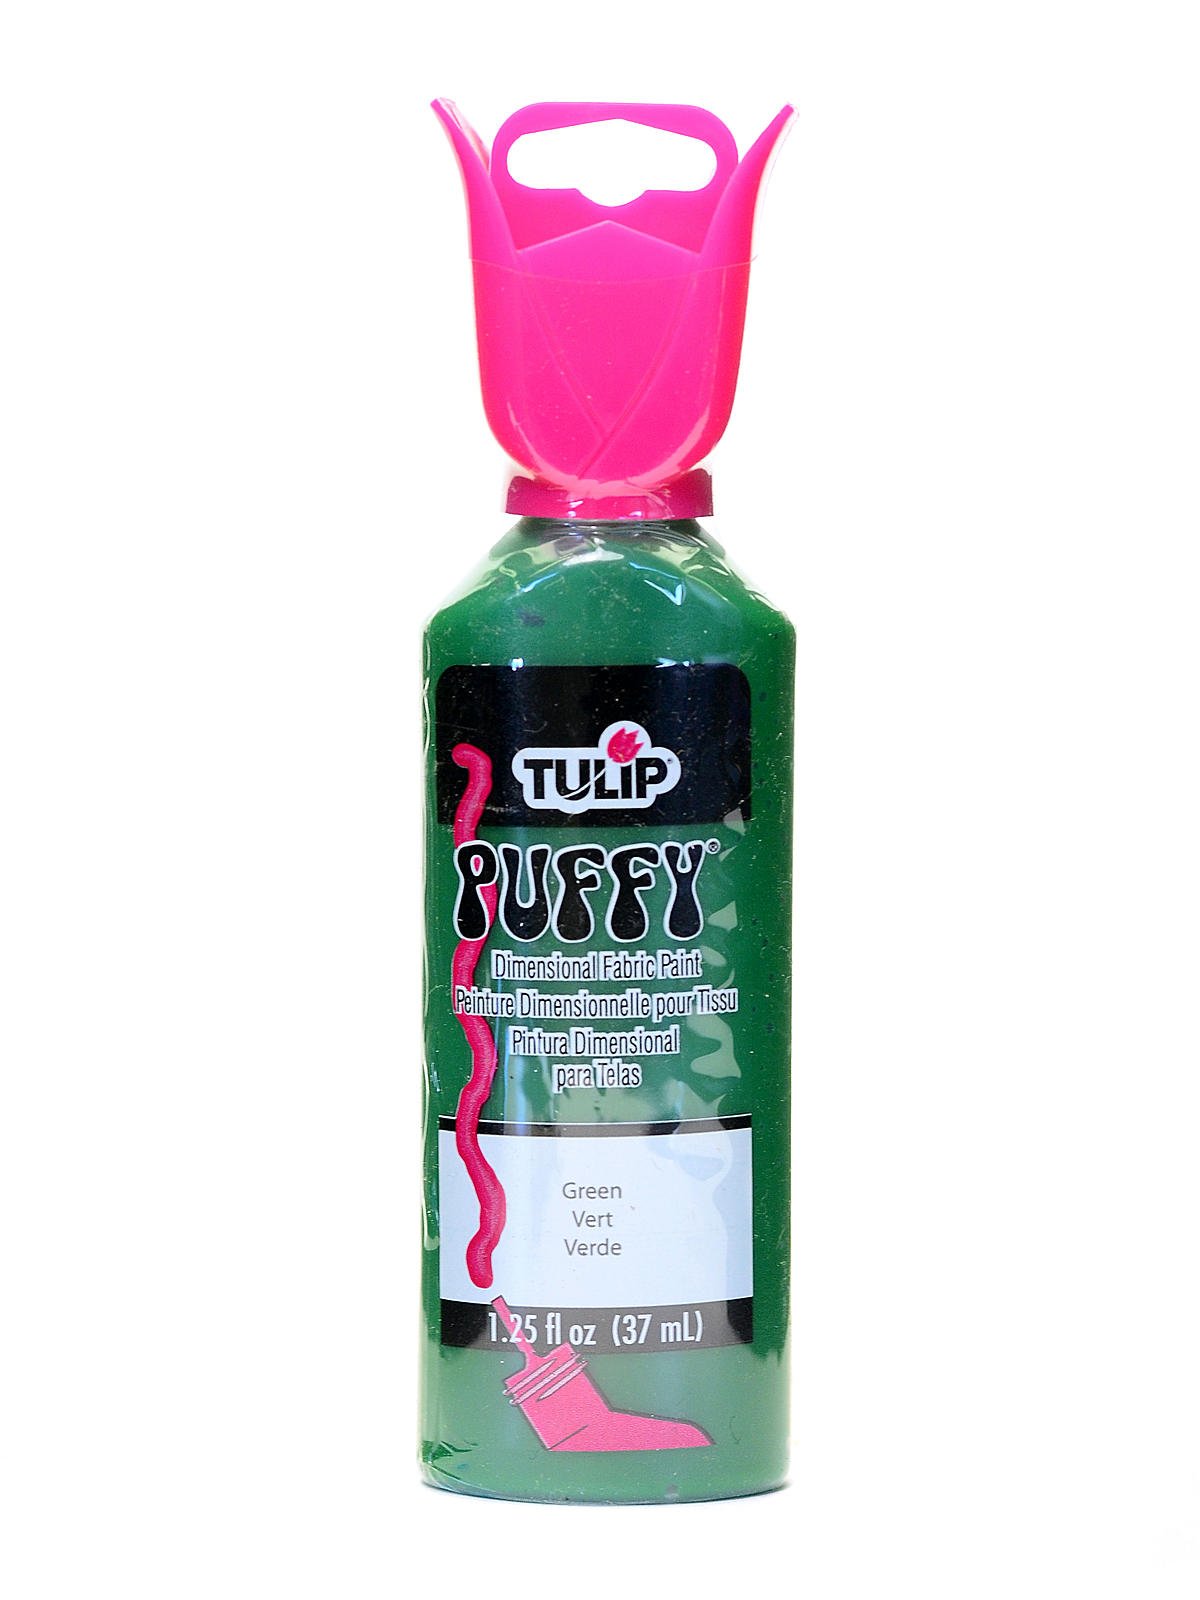 What is the difference between Tulip Slick and Tulip Puffy paint